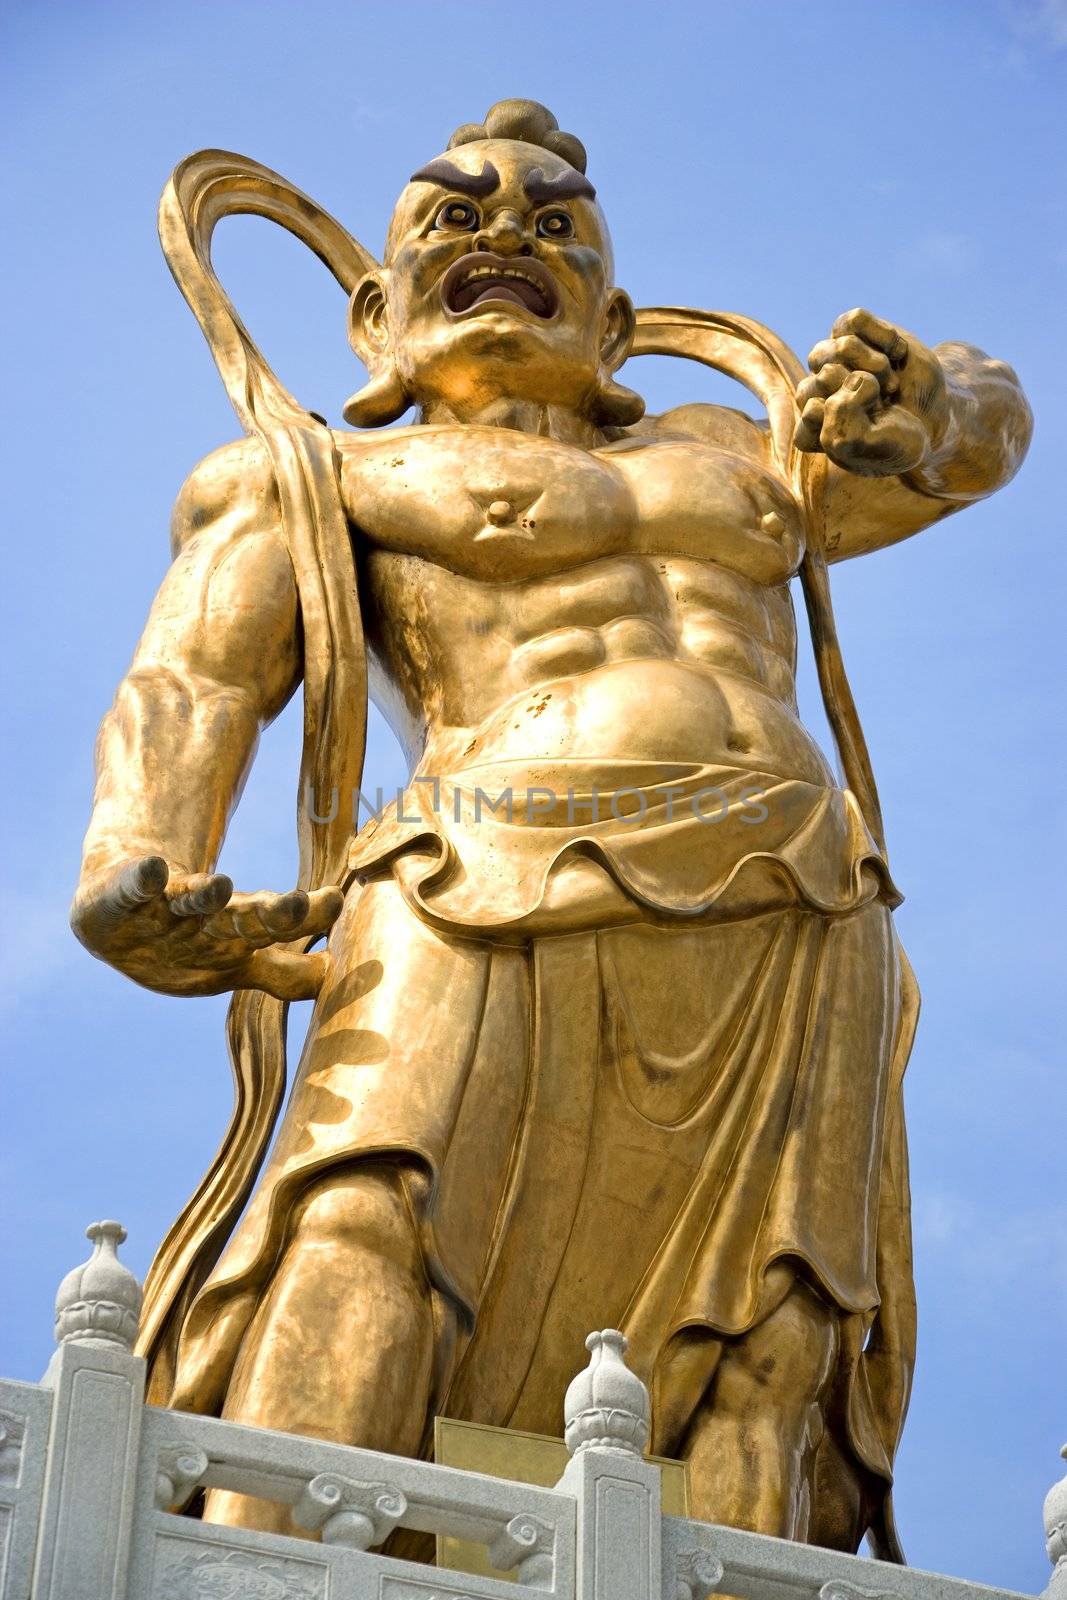 A giant statue of a guardian gurading the entrance to a Chinese temple in Malaysia.